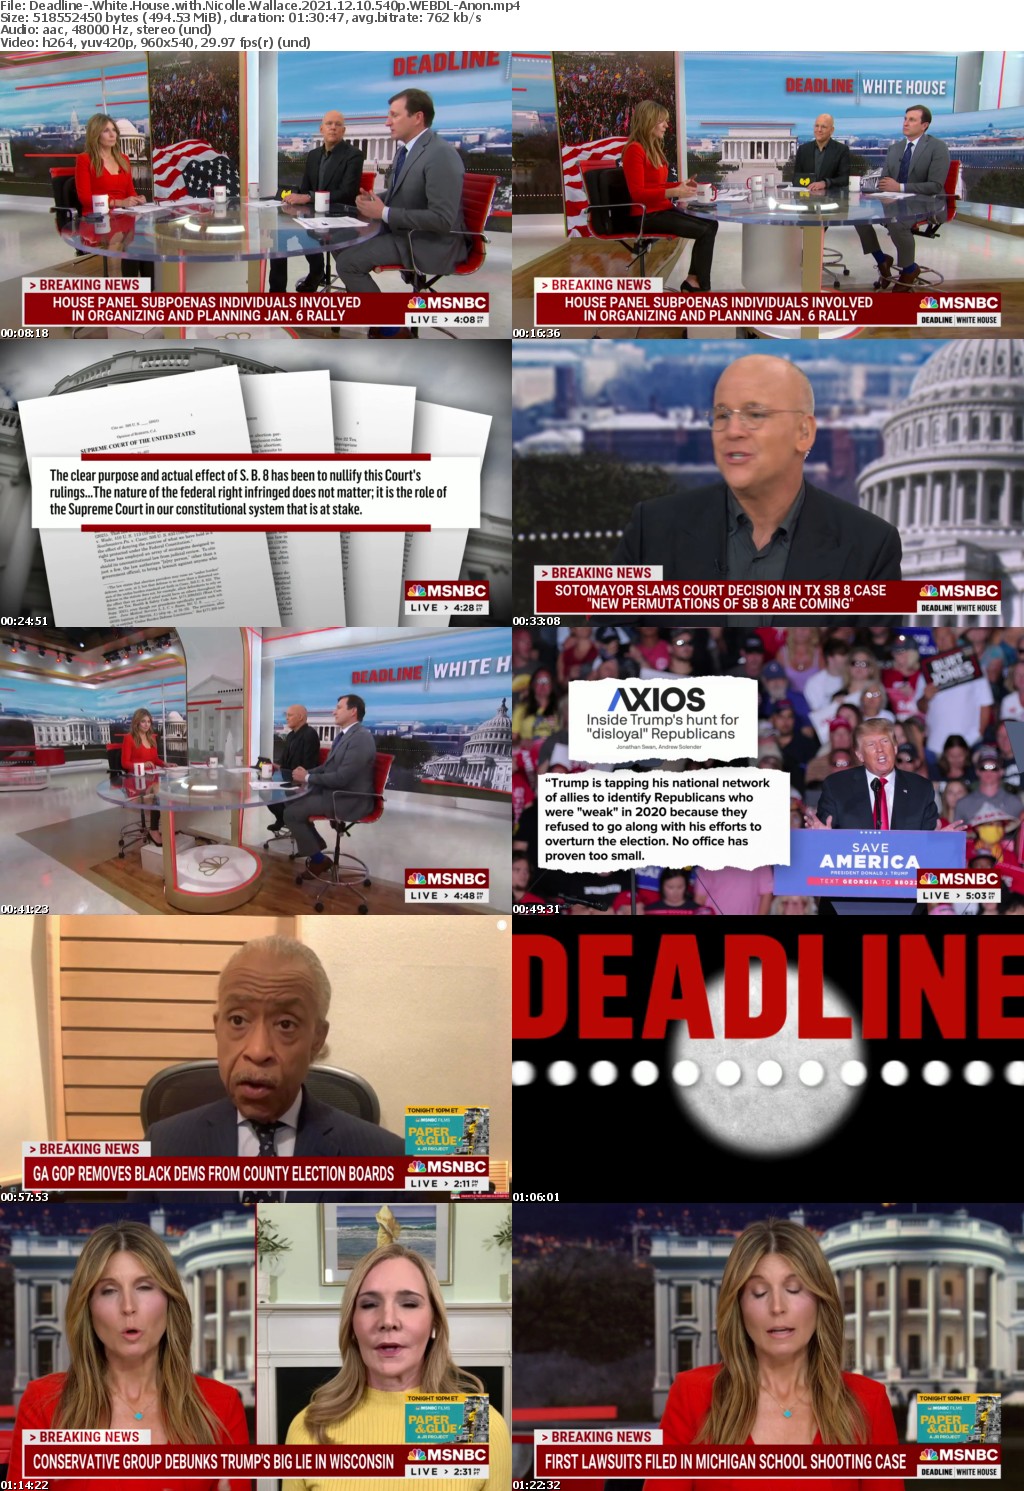 Deadline- White House with Nicolle Wallace 2021 12 10 540p WEBDL-Anon